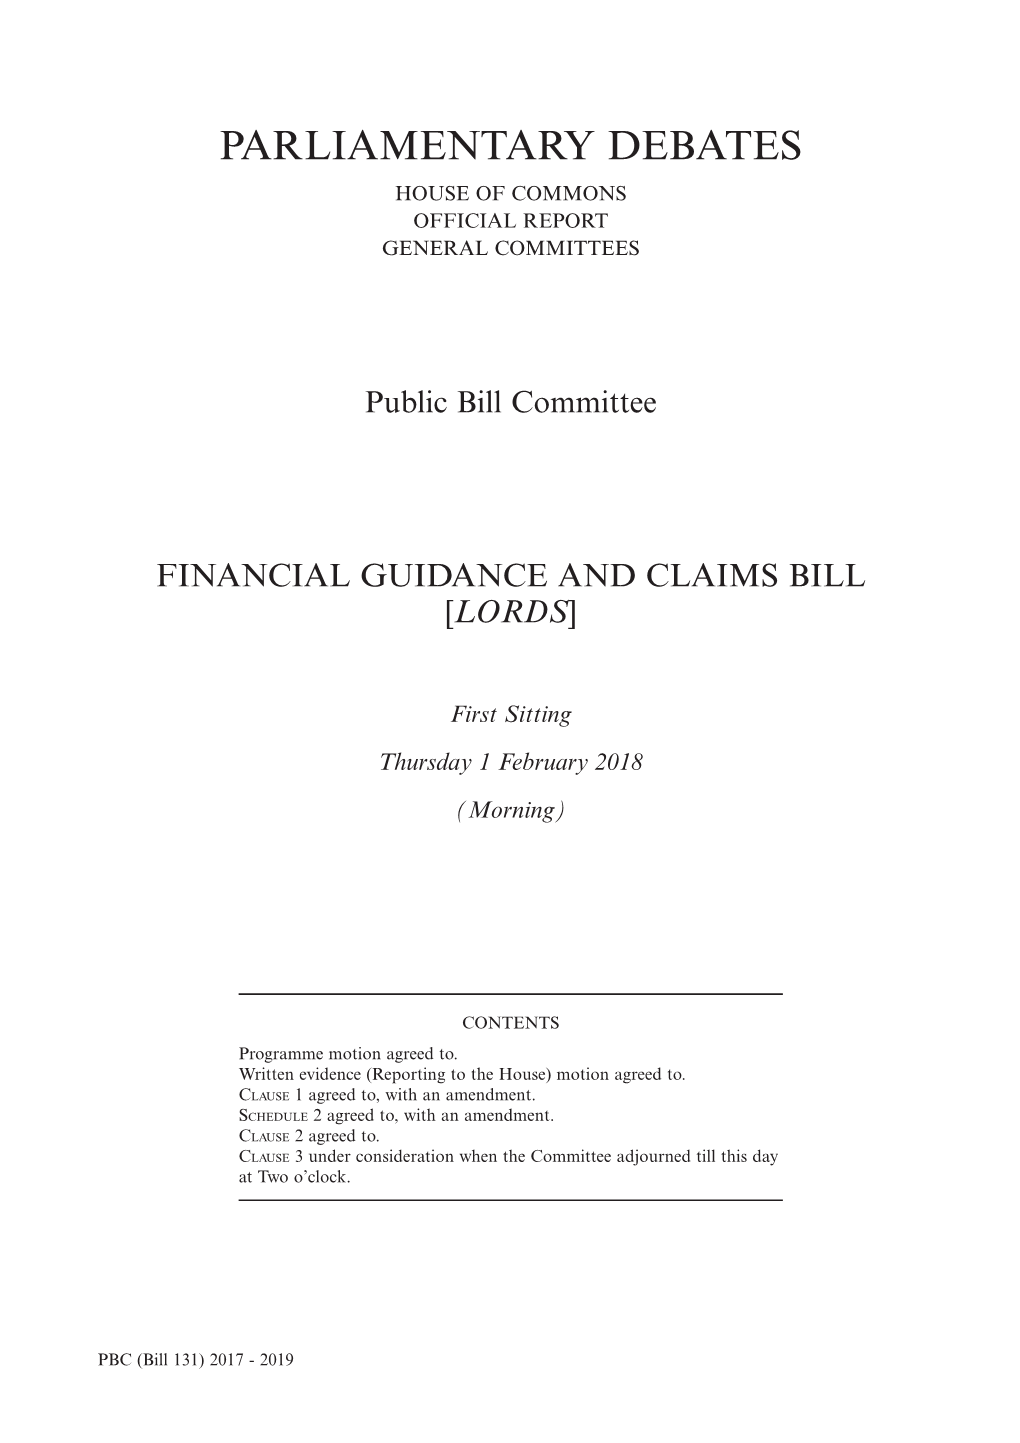 Financial Guidance and Claims Bill [Lords]